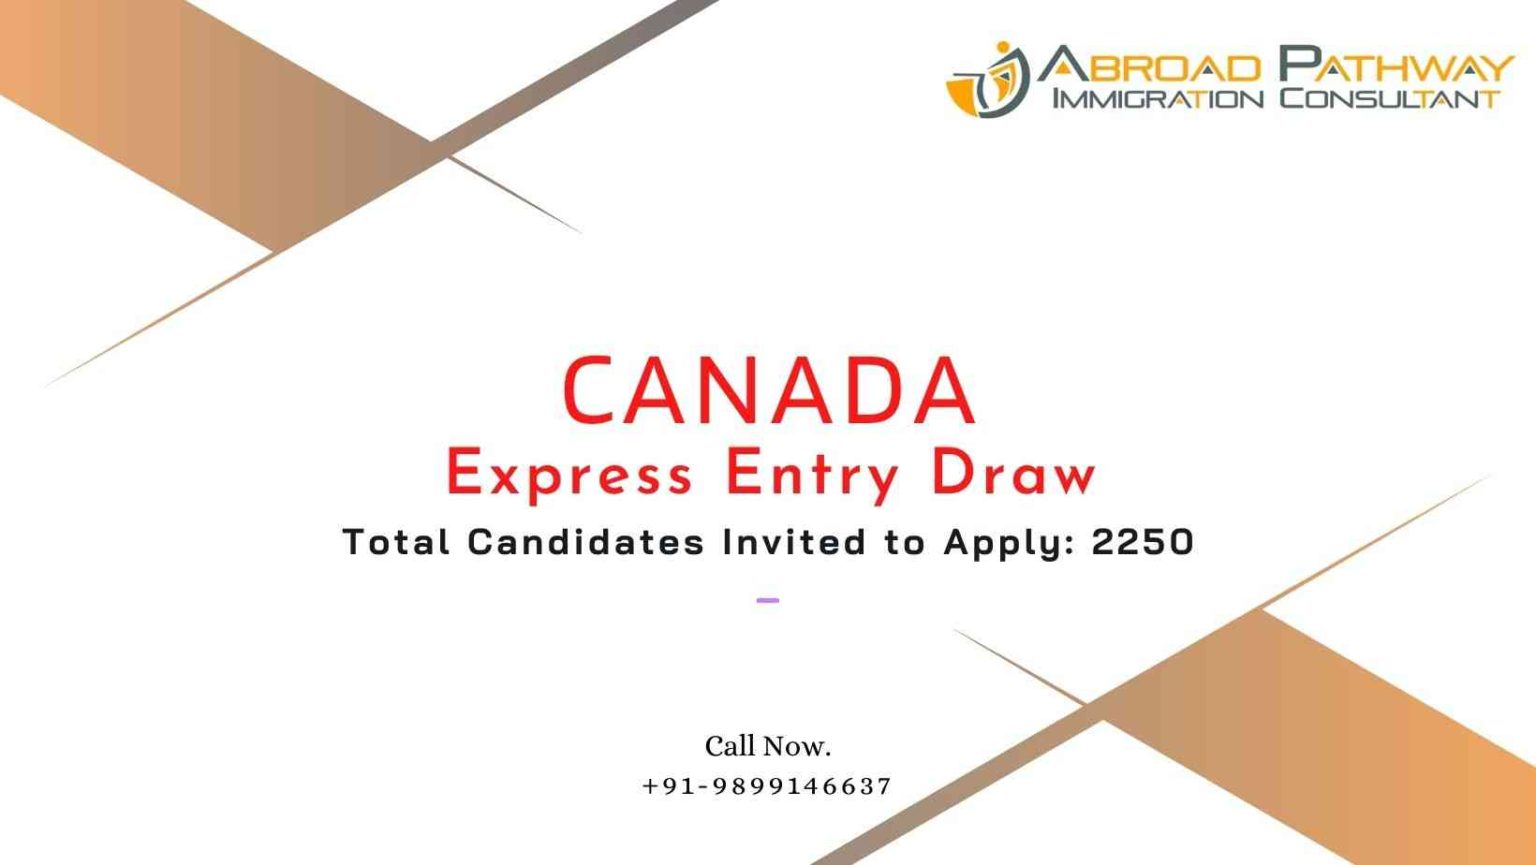 Canada Express Entry Draw invites 2,250 Immigration Candidates